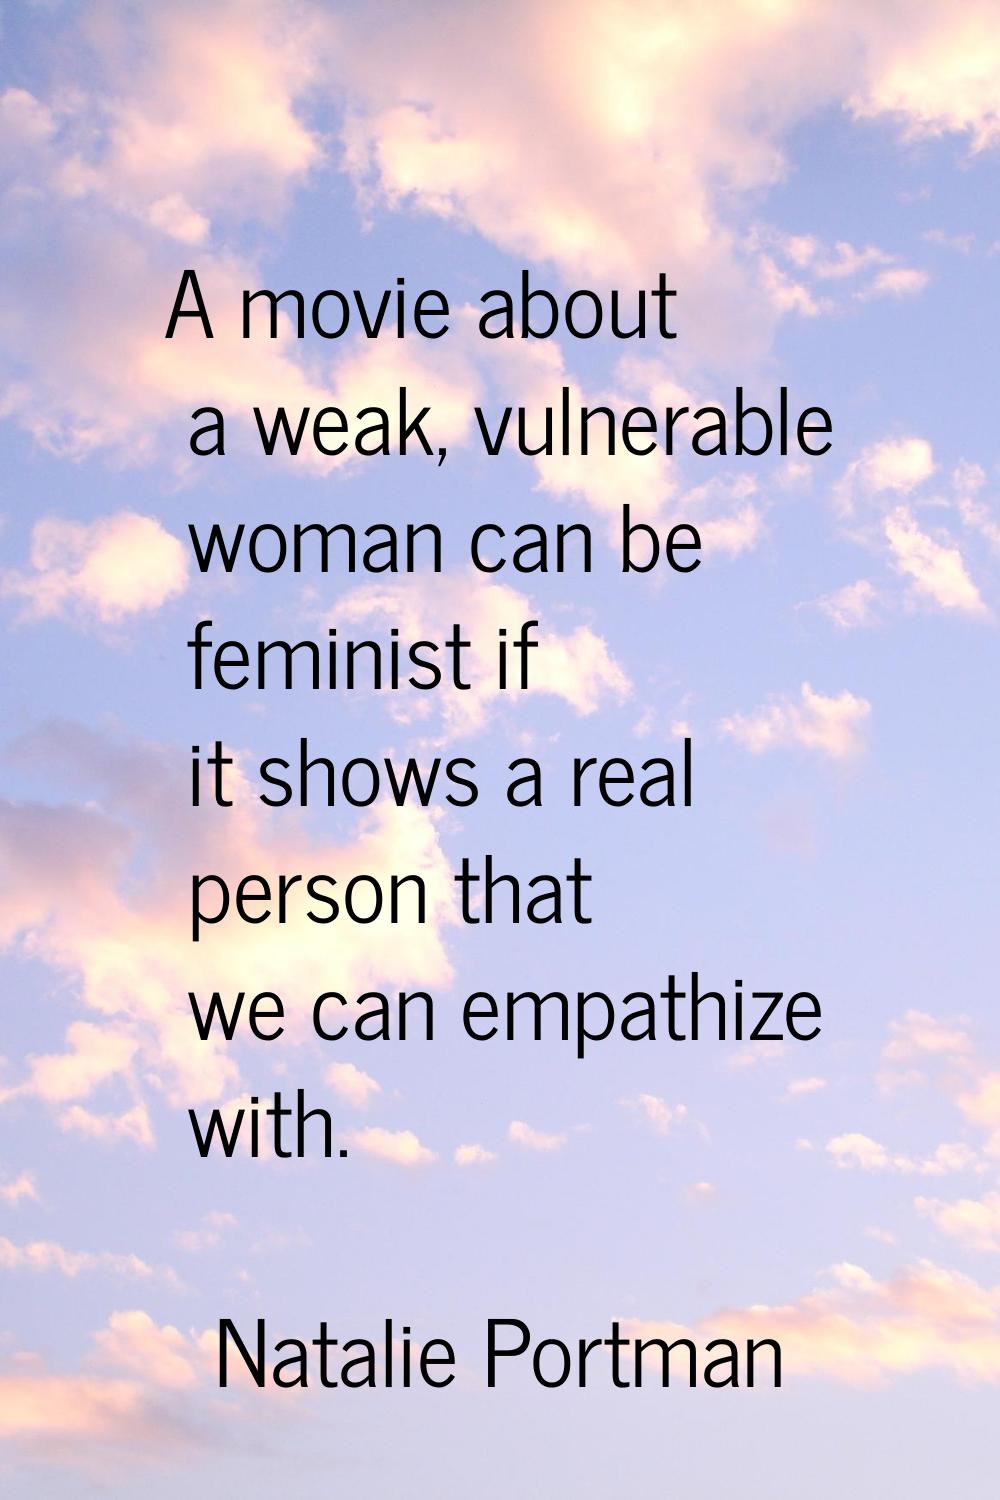 A movie about a weak, vulnerable woman can be feminist if it shows a real person that we can empath